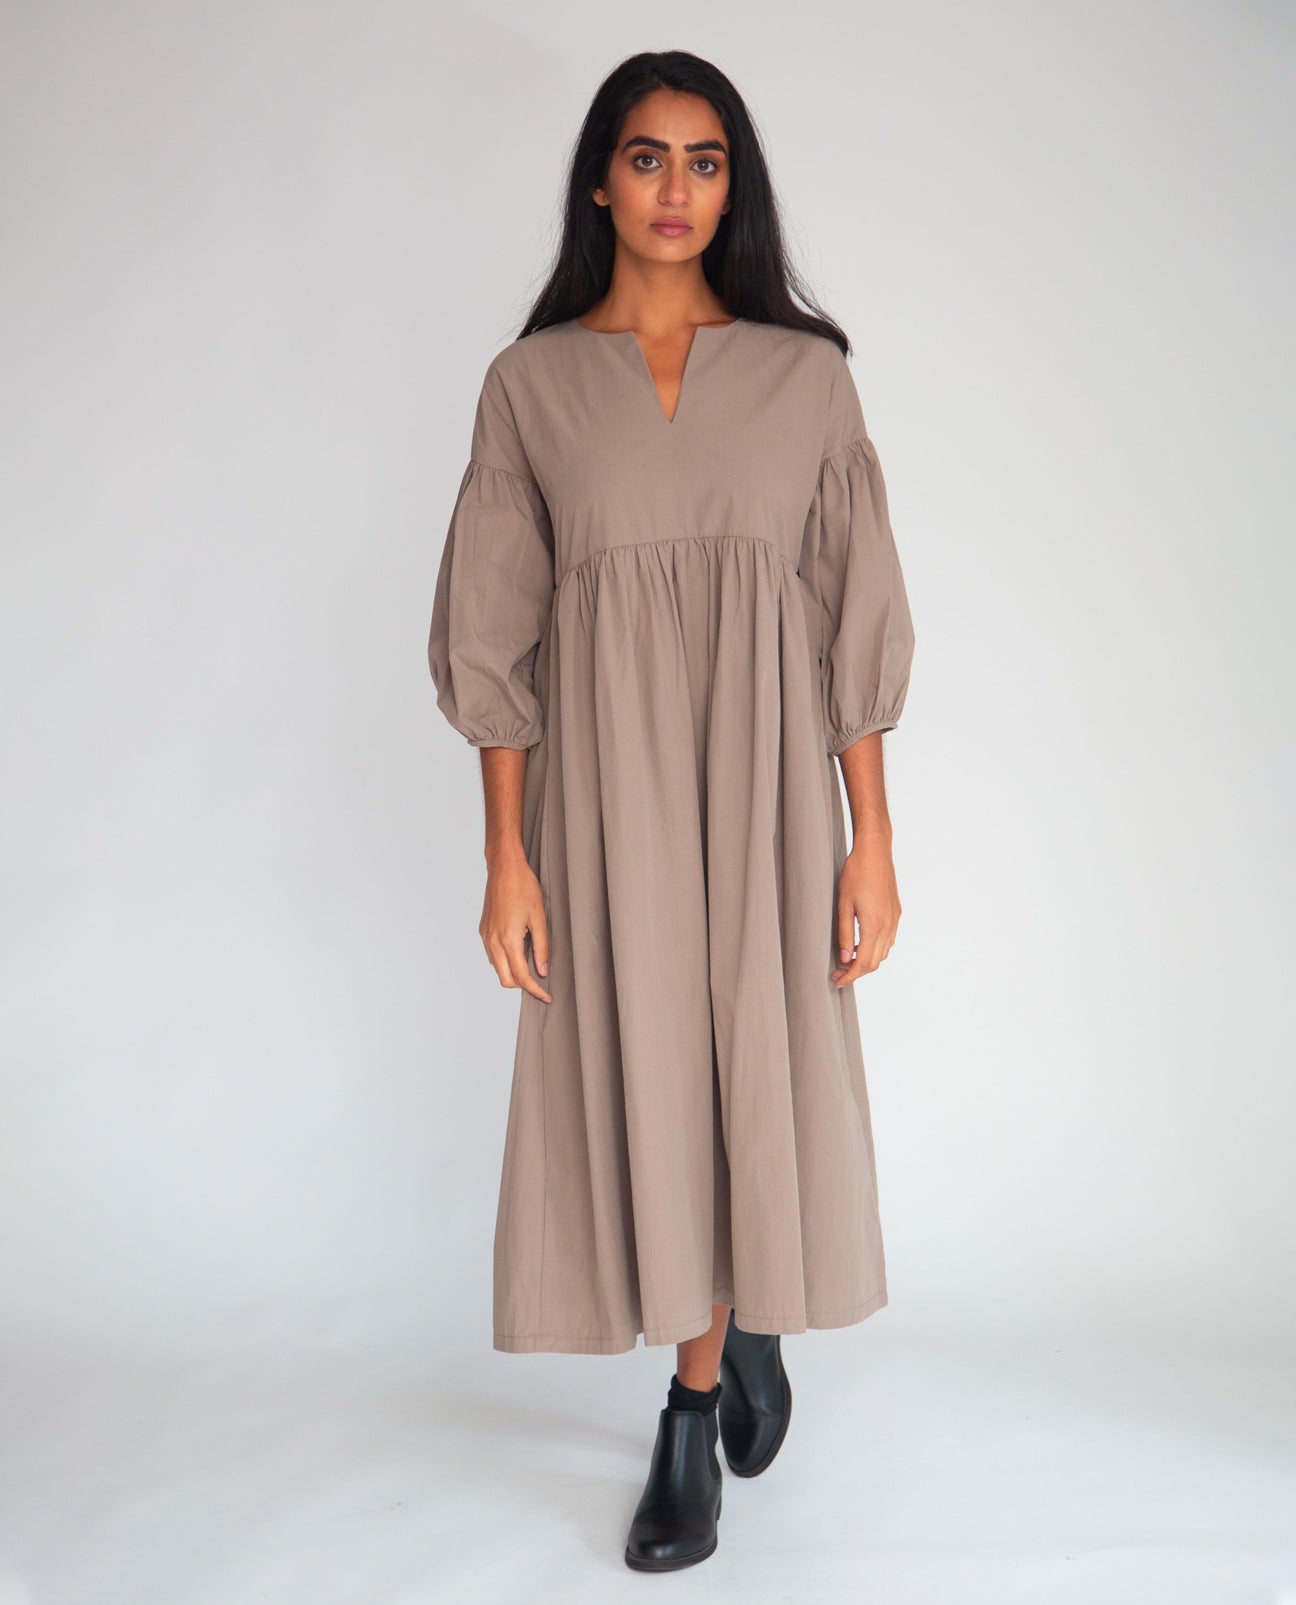 Meilani Organic Cotton Dress In Olive